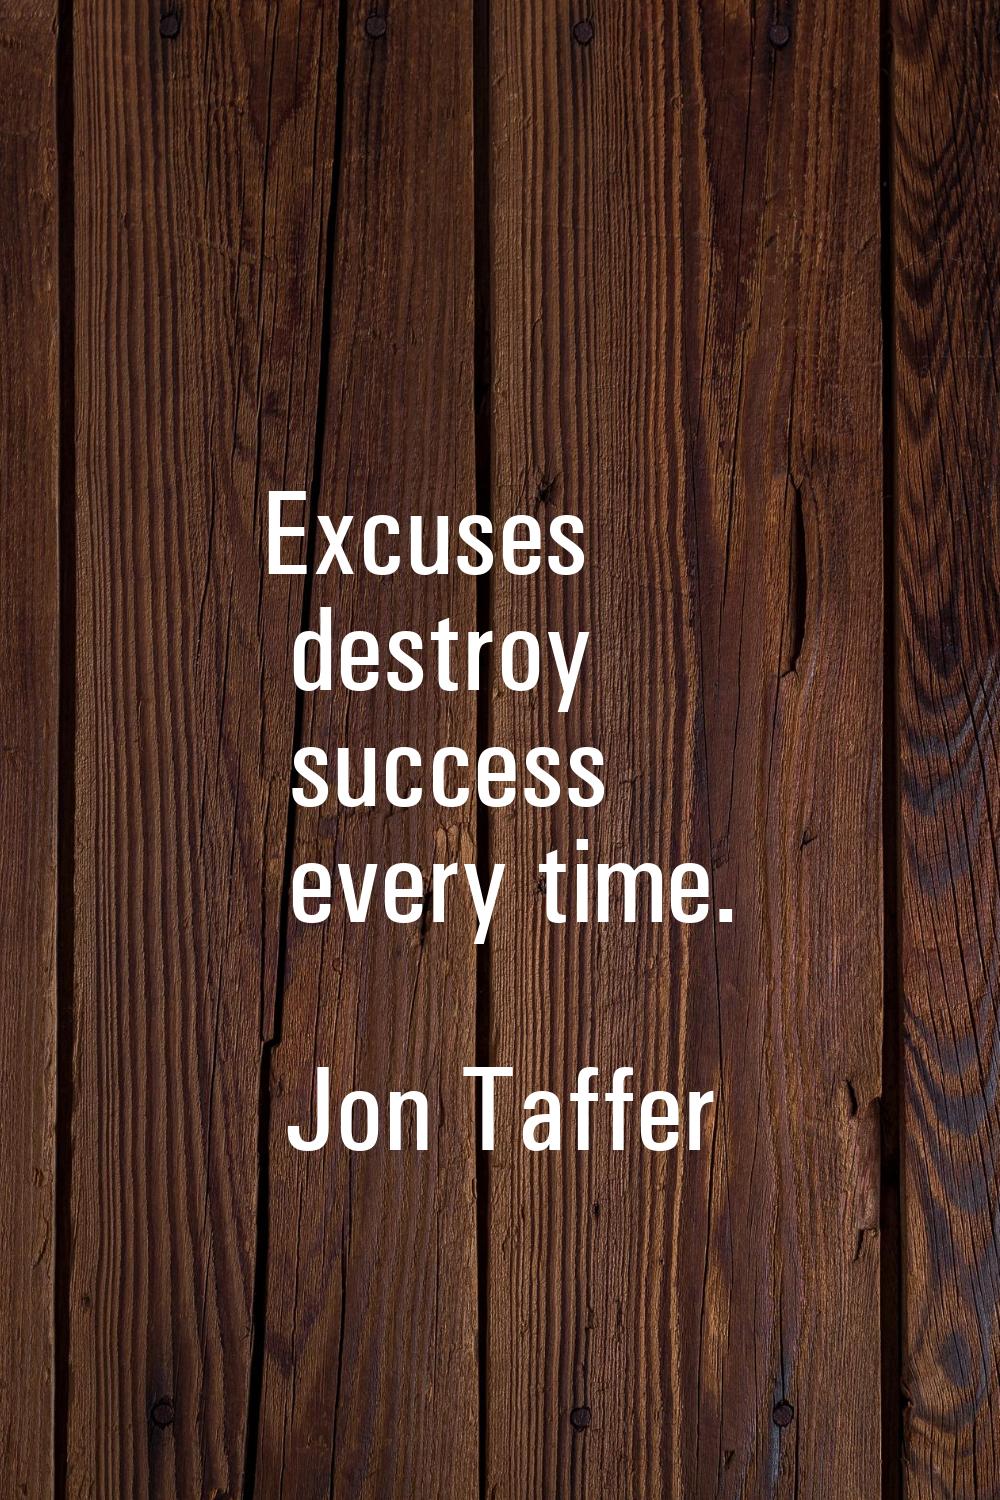 Excuses destroy success every time.